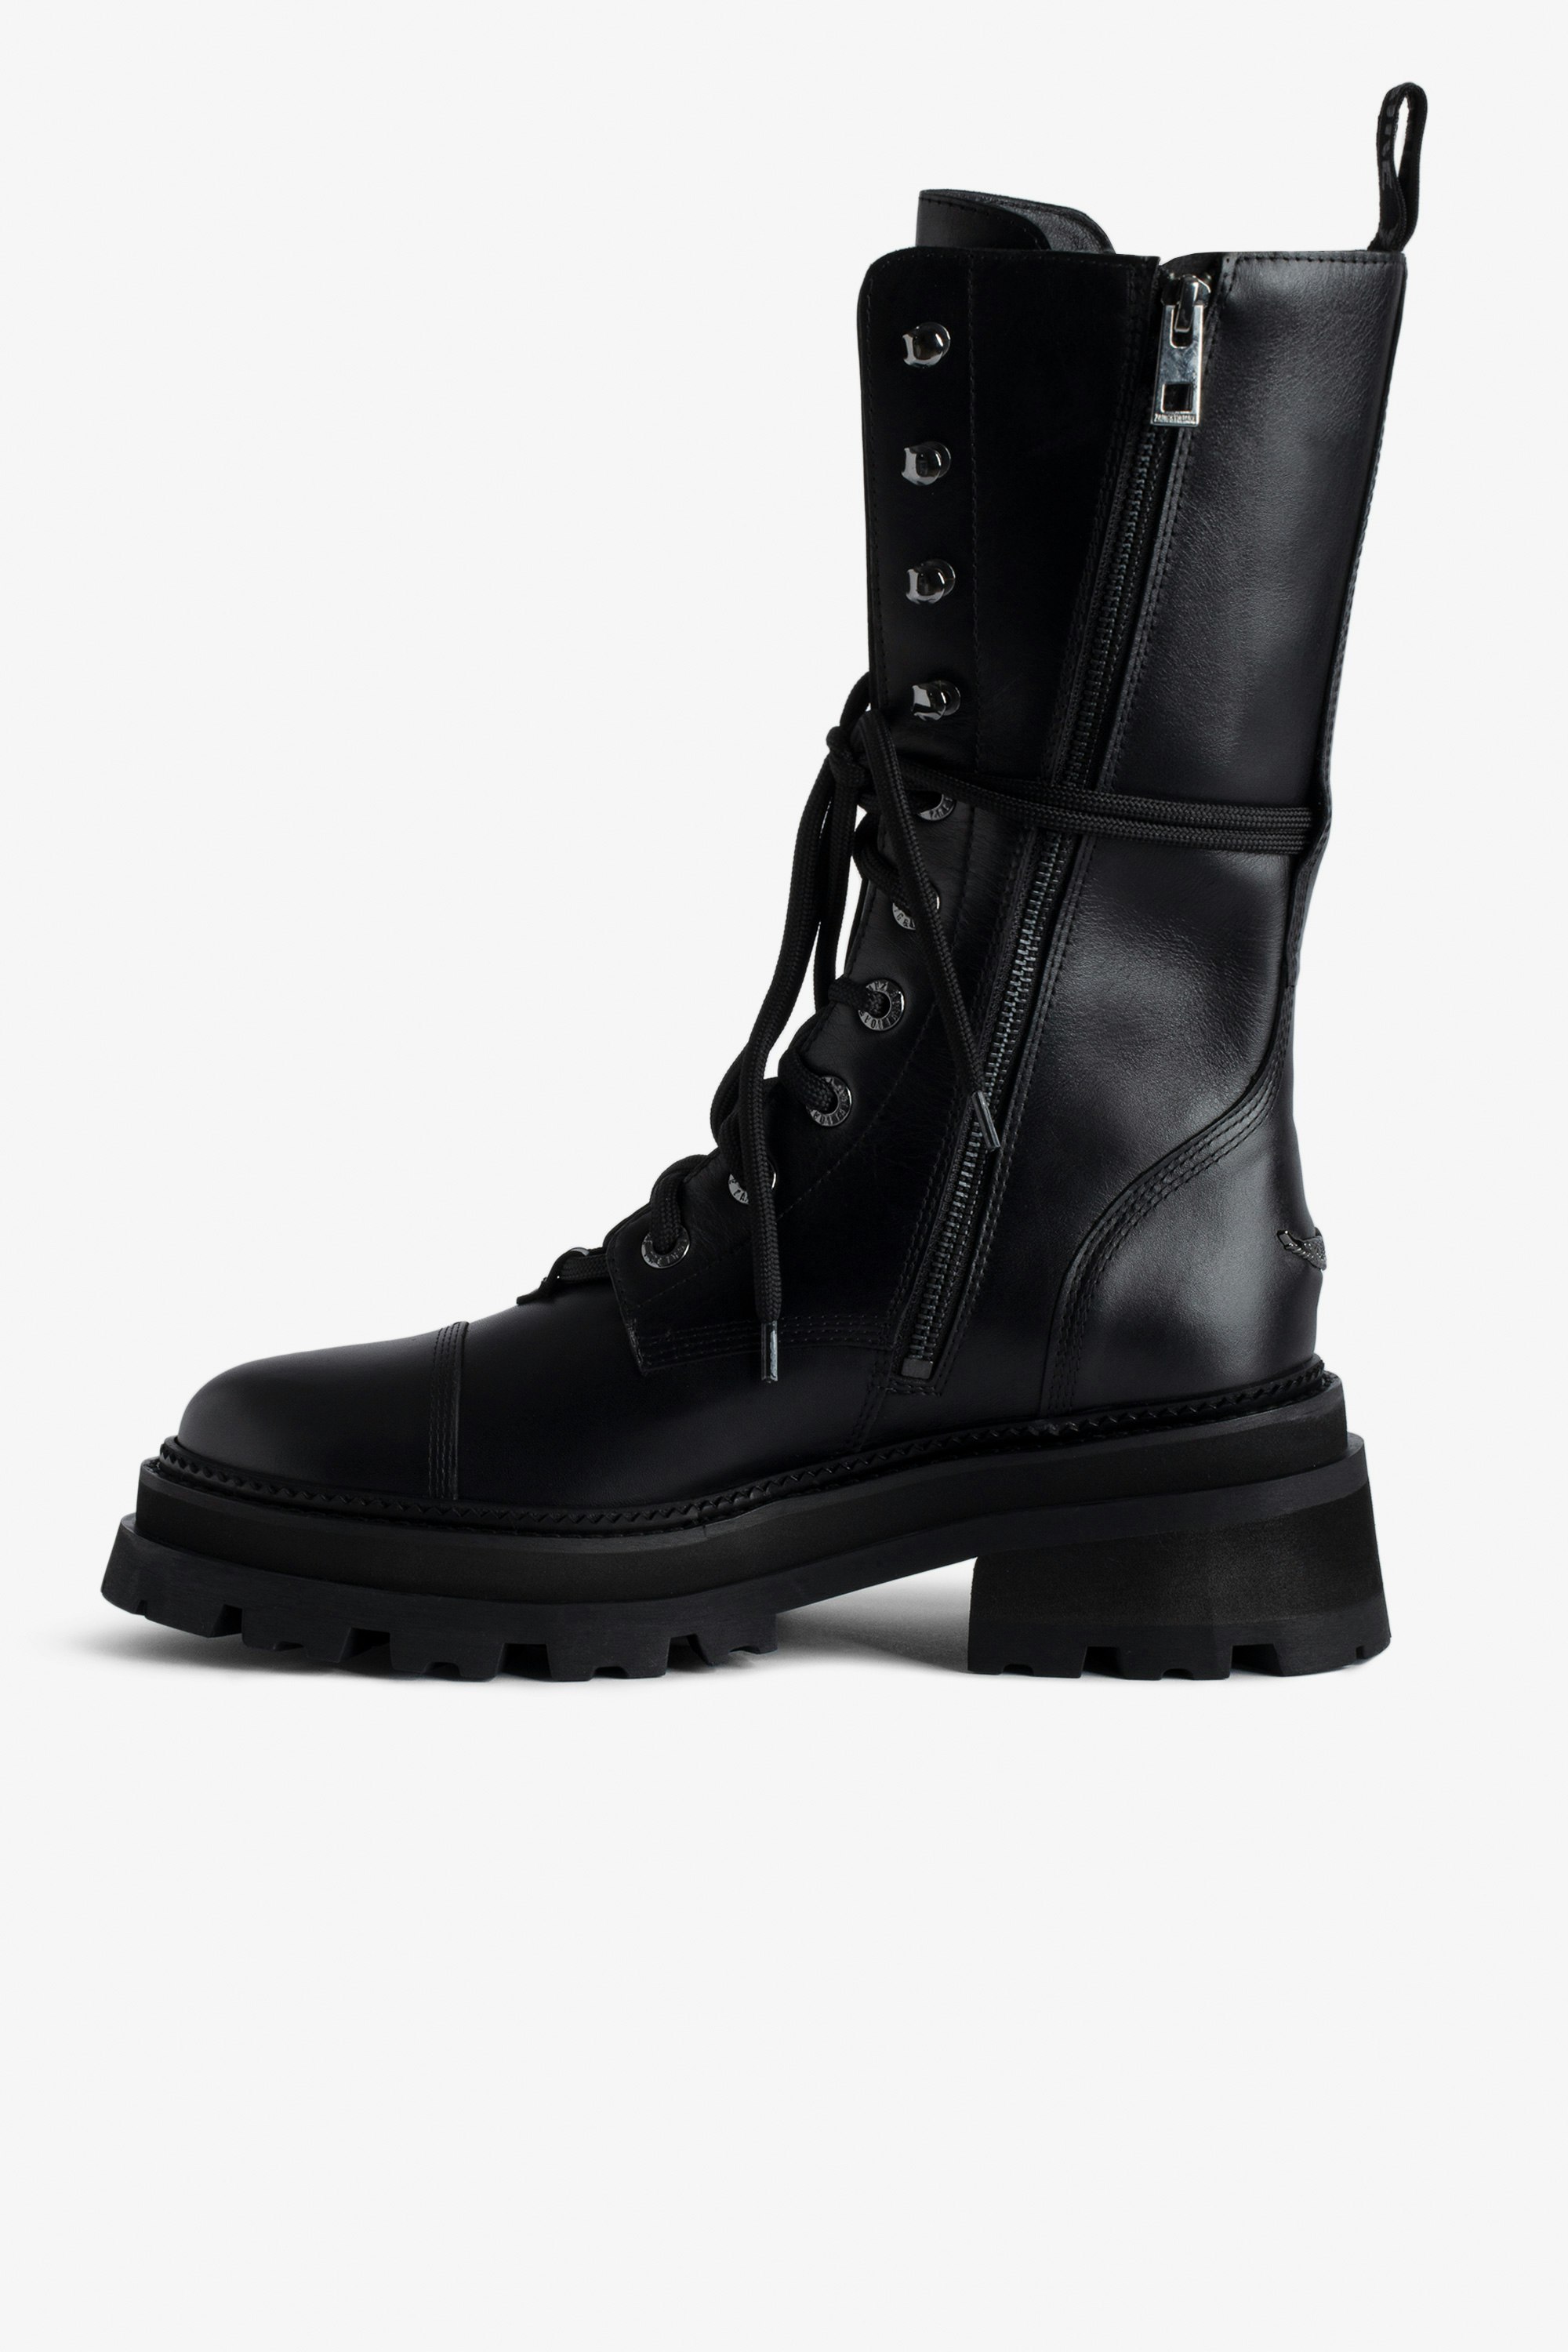 Ride High Ankle Boots boots black women | Zadig&Voltaire